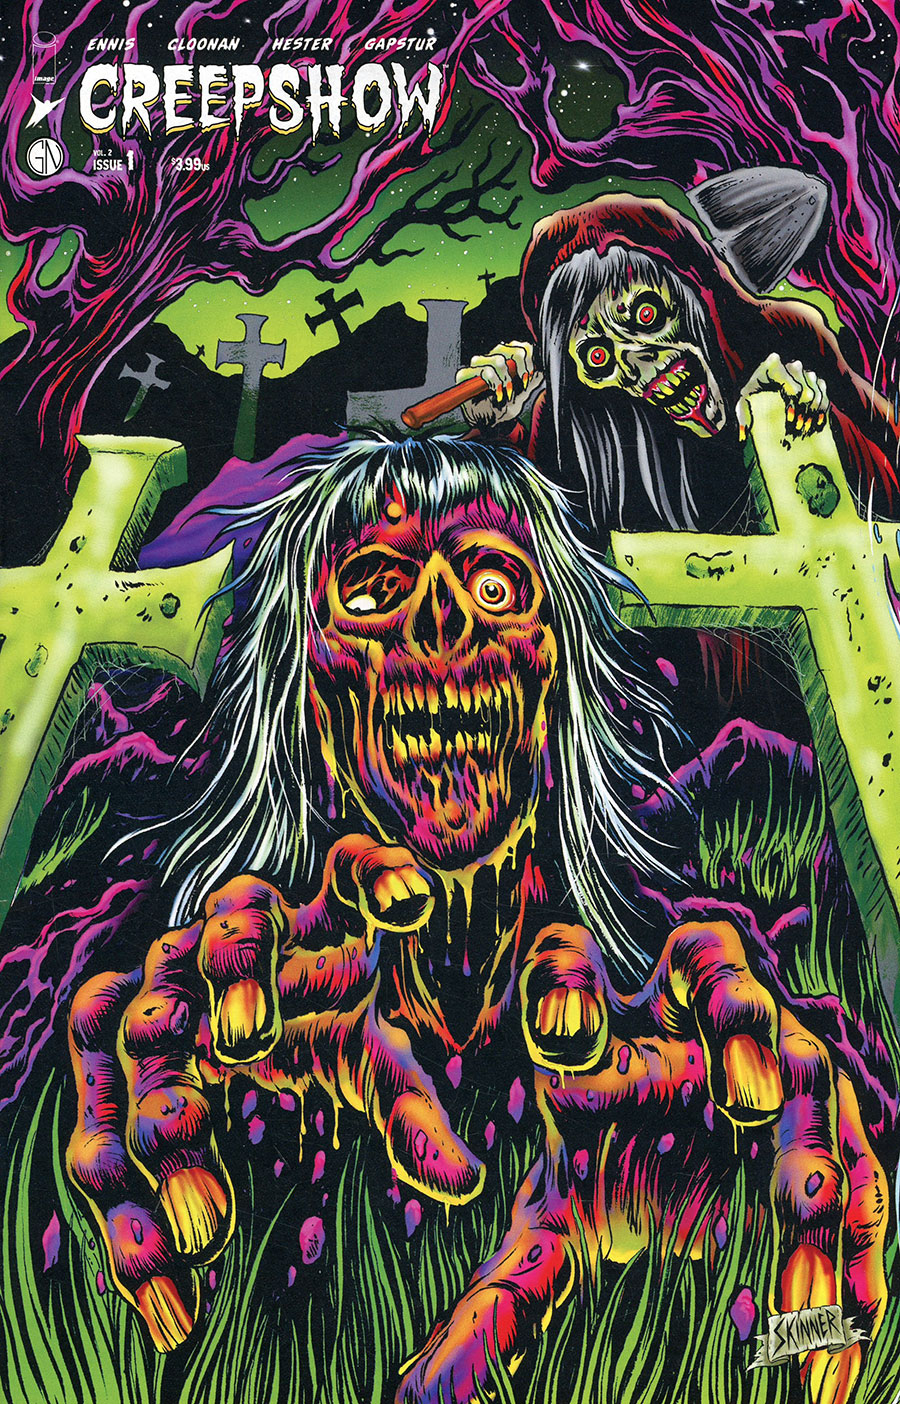 Creepshow Vol 2 #1 Cover C Incentive Skinner Variant Cover